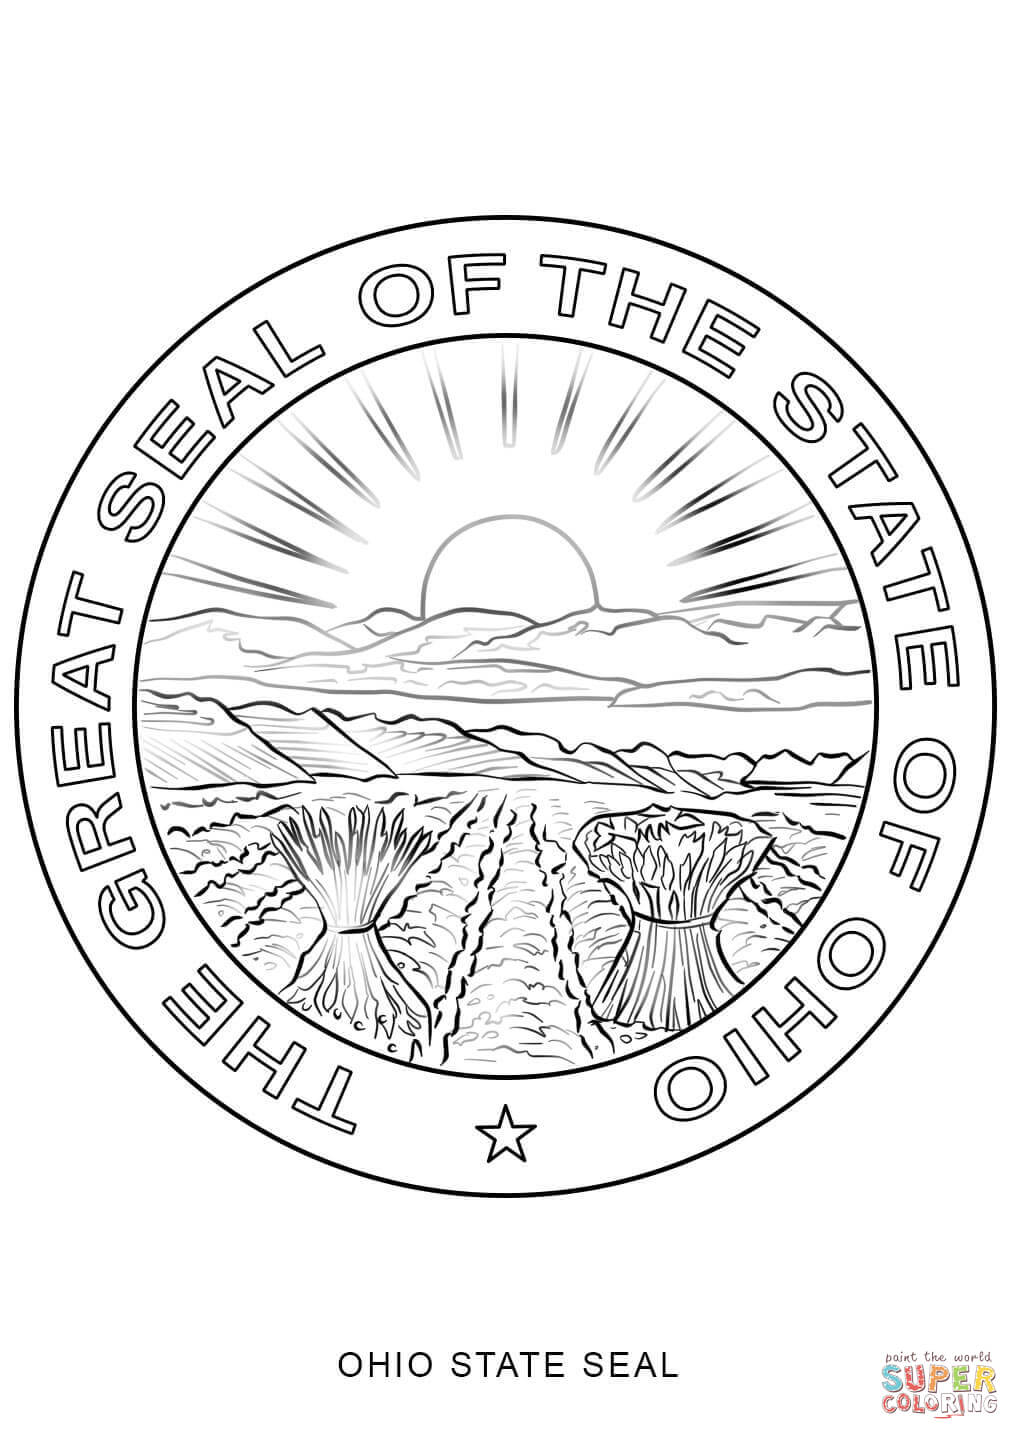 Ohio State Seal coloring page | Free Printable Coloring Pages